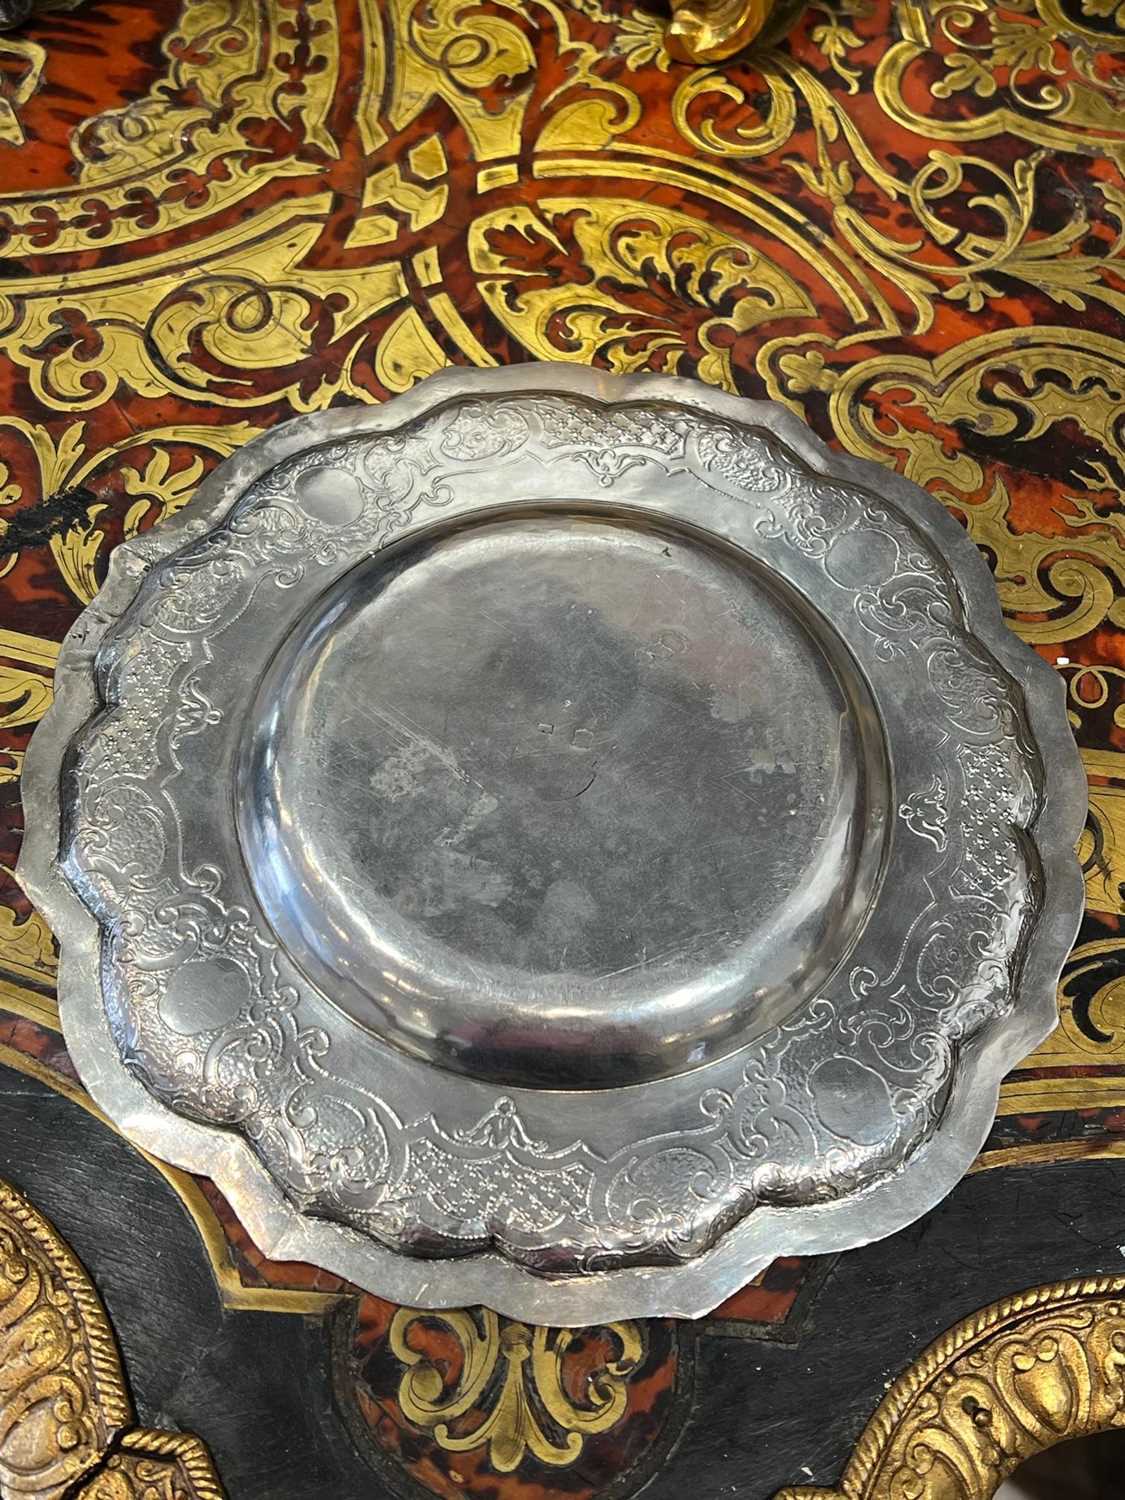 AN 18TH / 19TH CENTURY GERMAN OR SWISS SILVER AND PARCEL GILT TRAY - Image 4 of 4